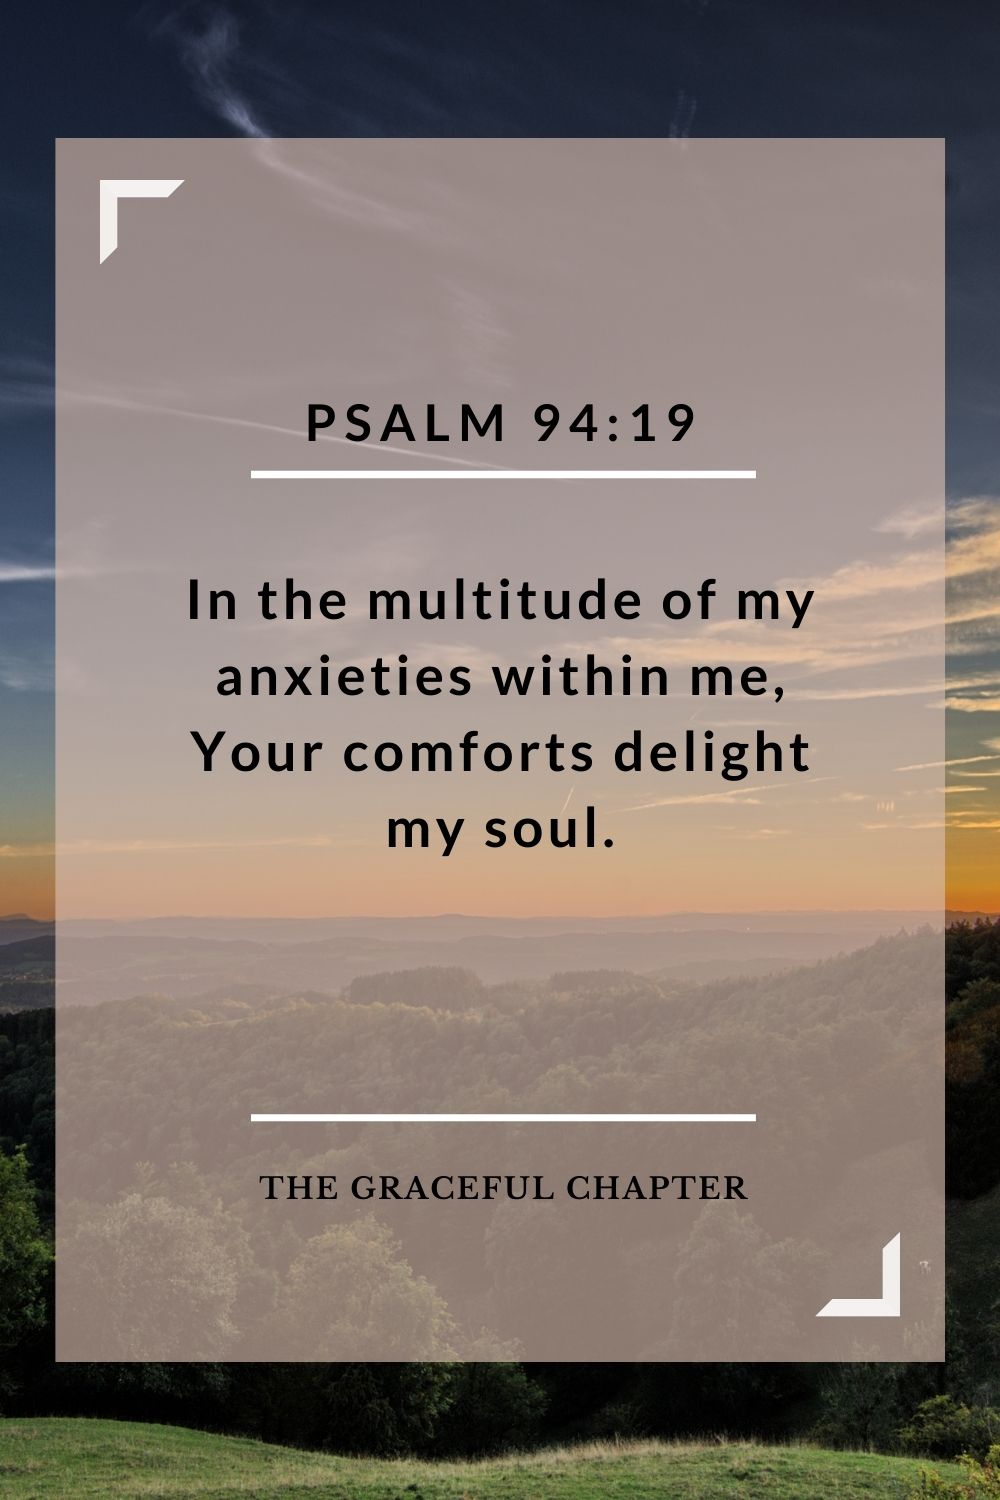 In the multitude of my anxieties within me, Your comforts delight my soul. Psalm 94:19